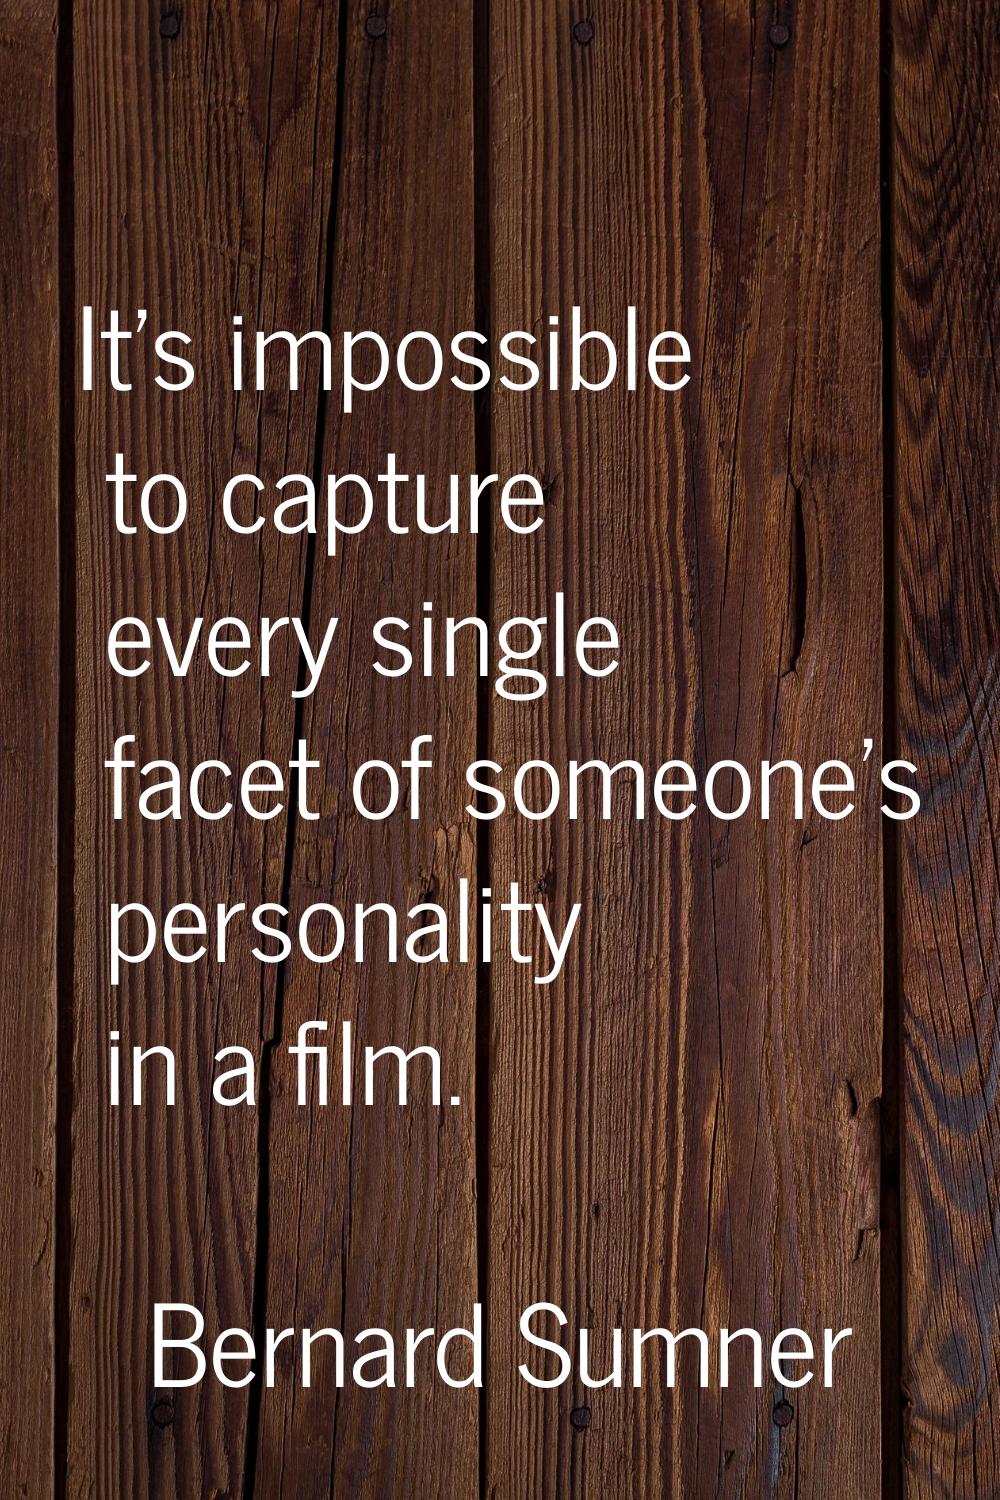 It's impossible to capture every single facet of someone's personality in a film.